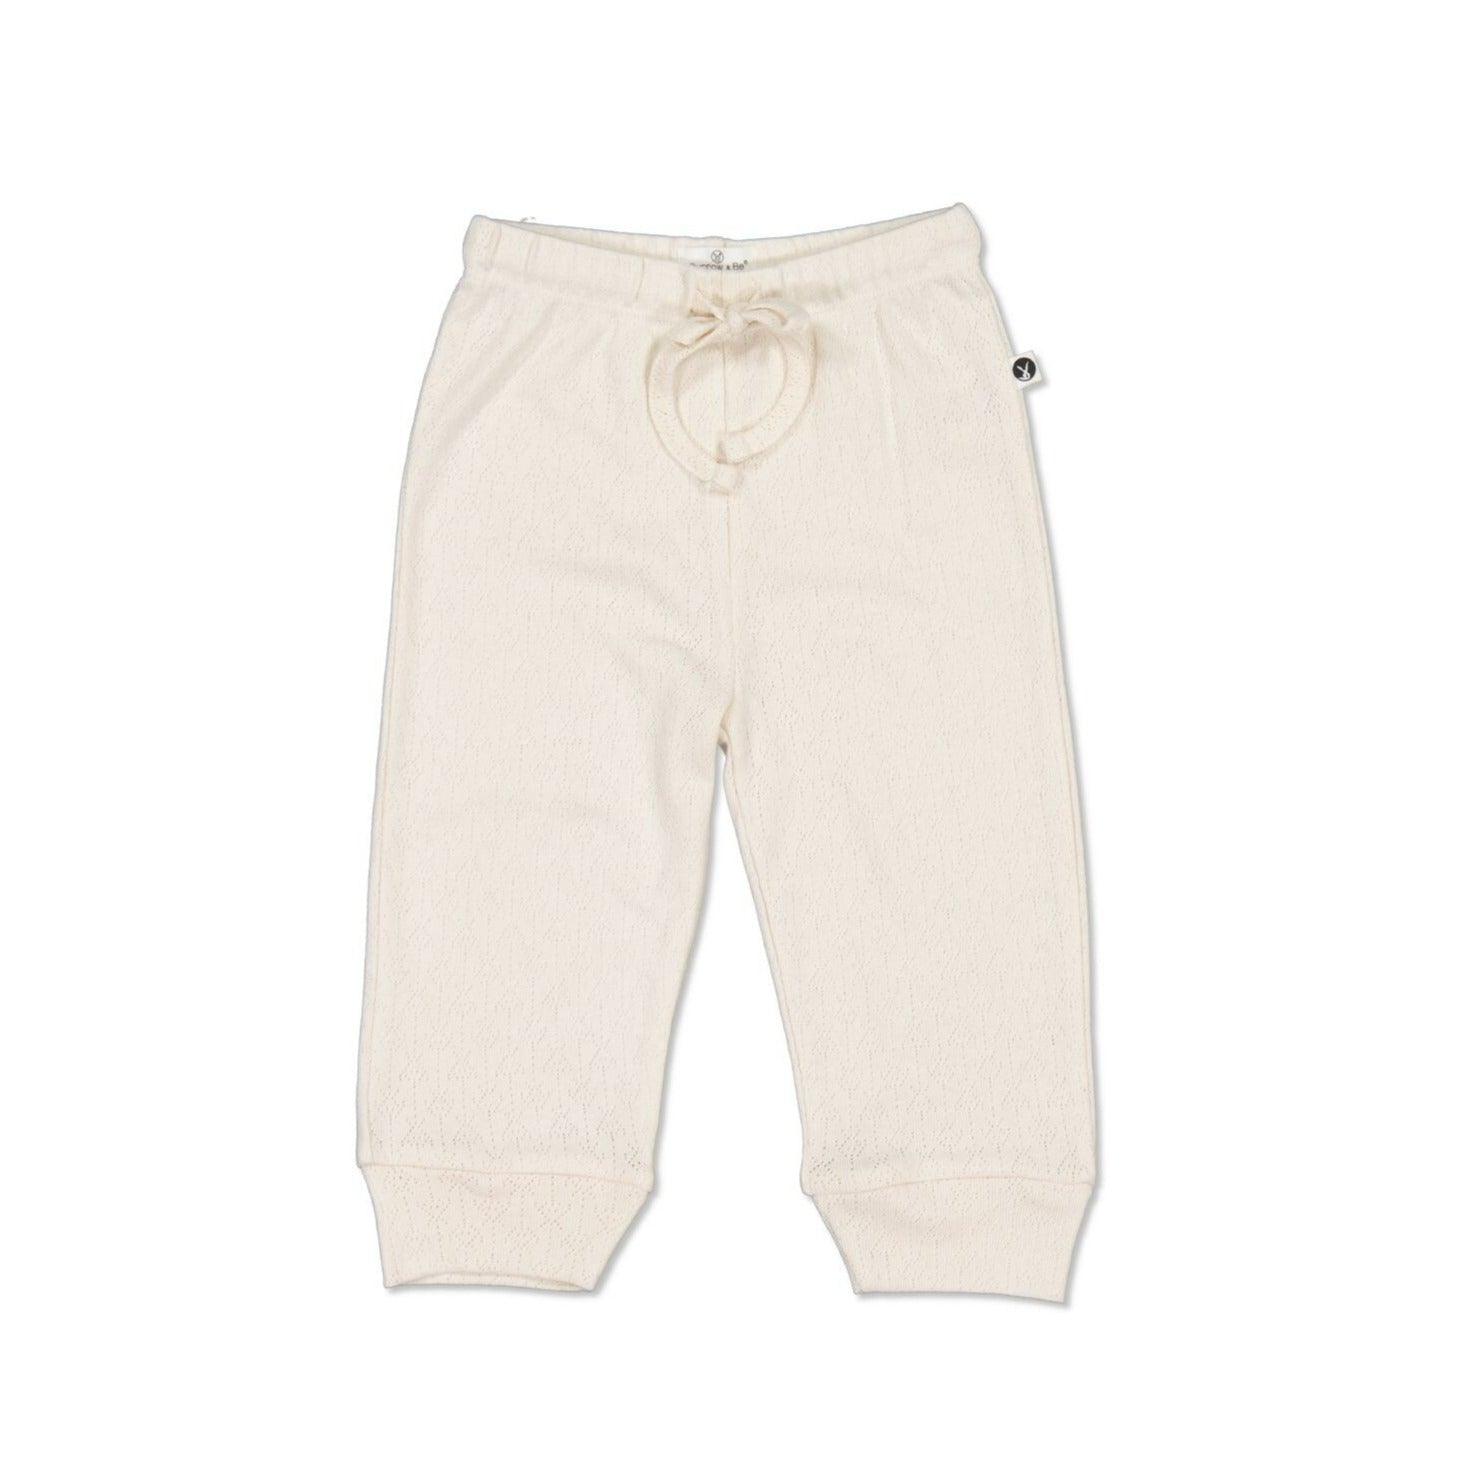 Burrow & Be Pointelle Baby Pants - Natural